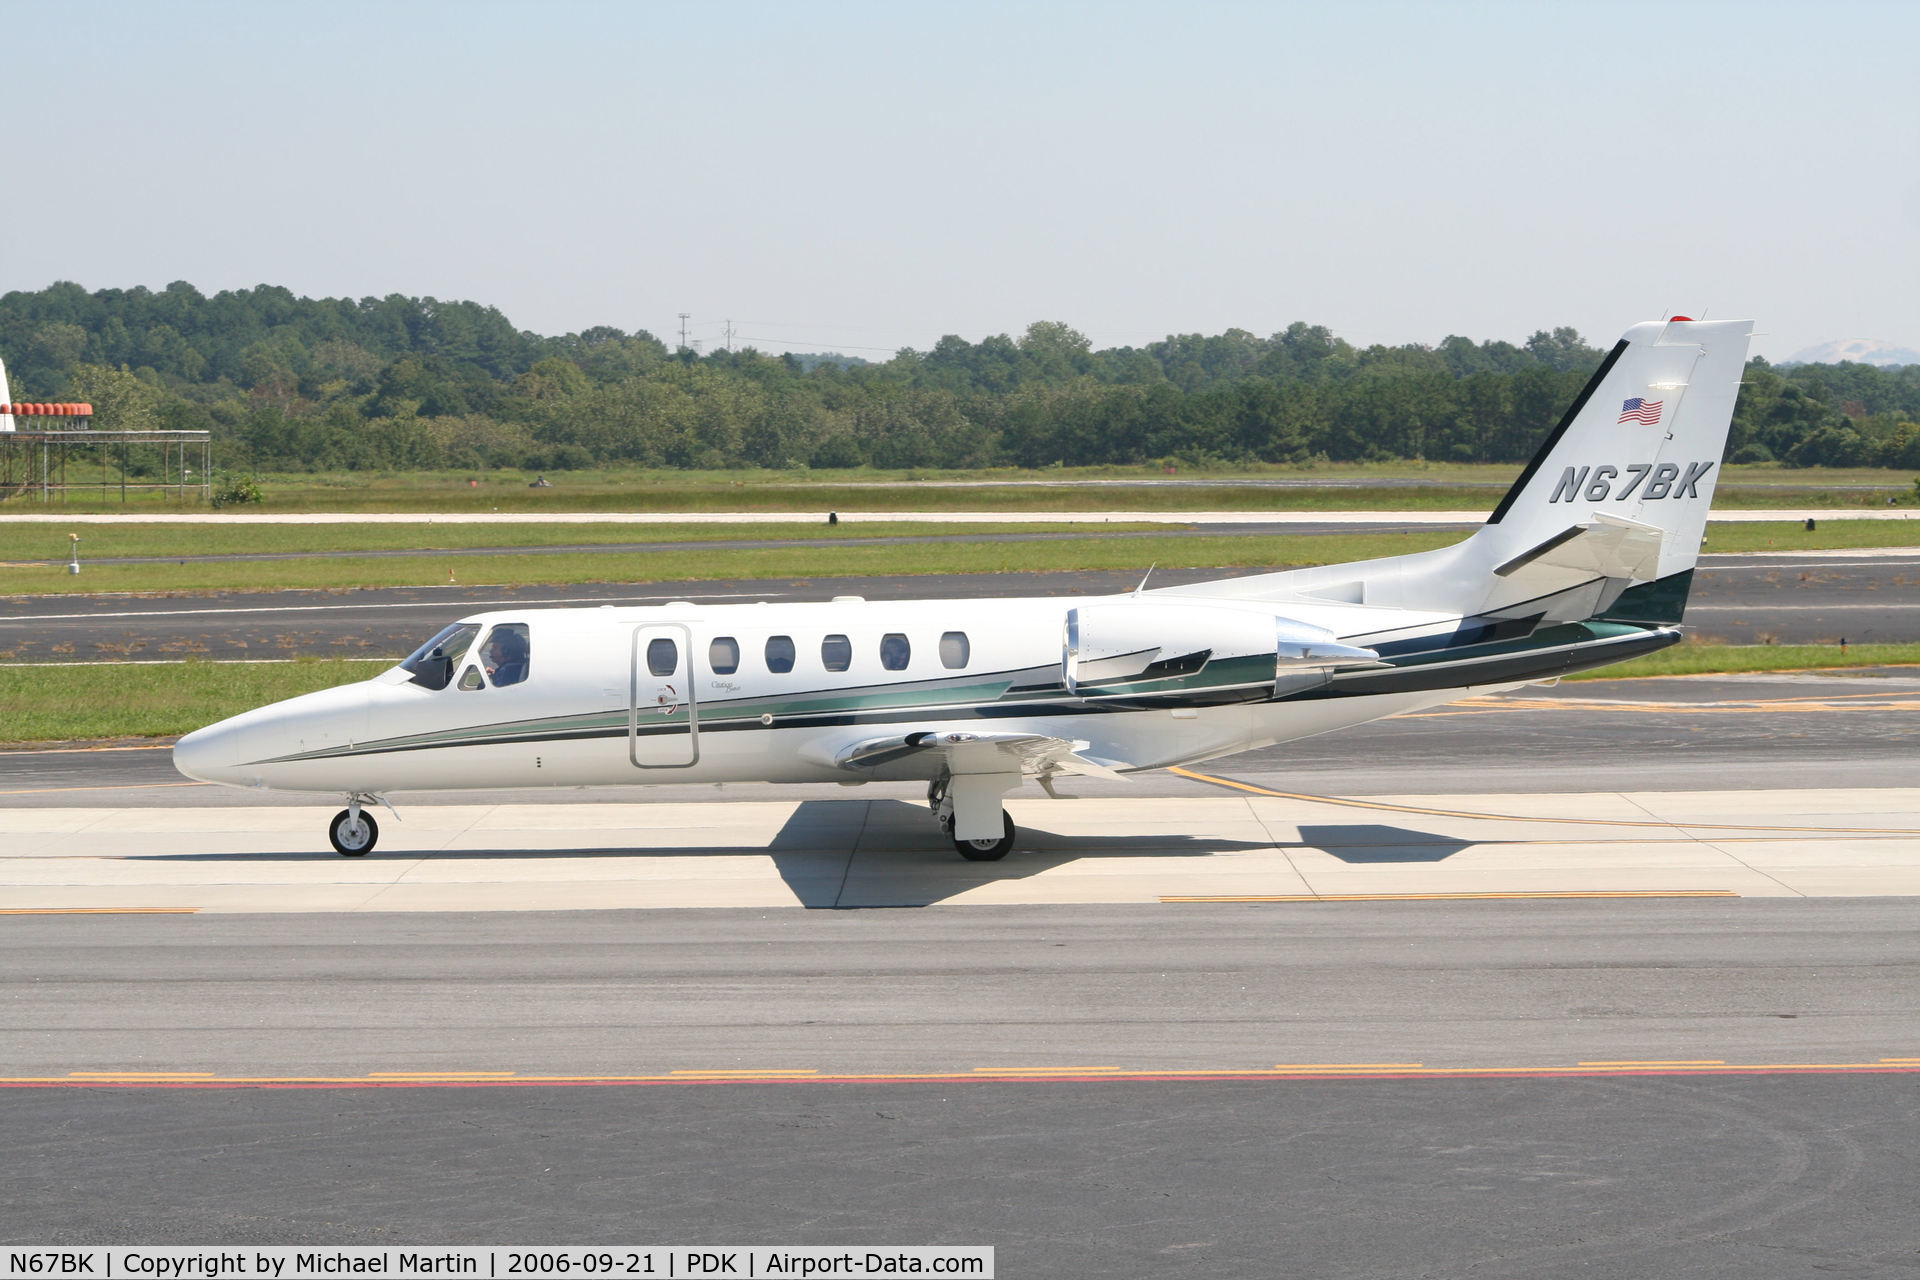 N67BK, 2002 Cessna 550 C/N 550-0997, Taxing to Epps Air Service